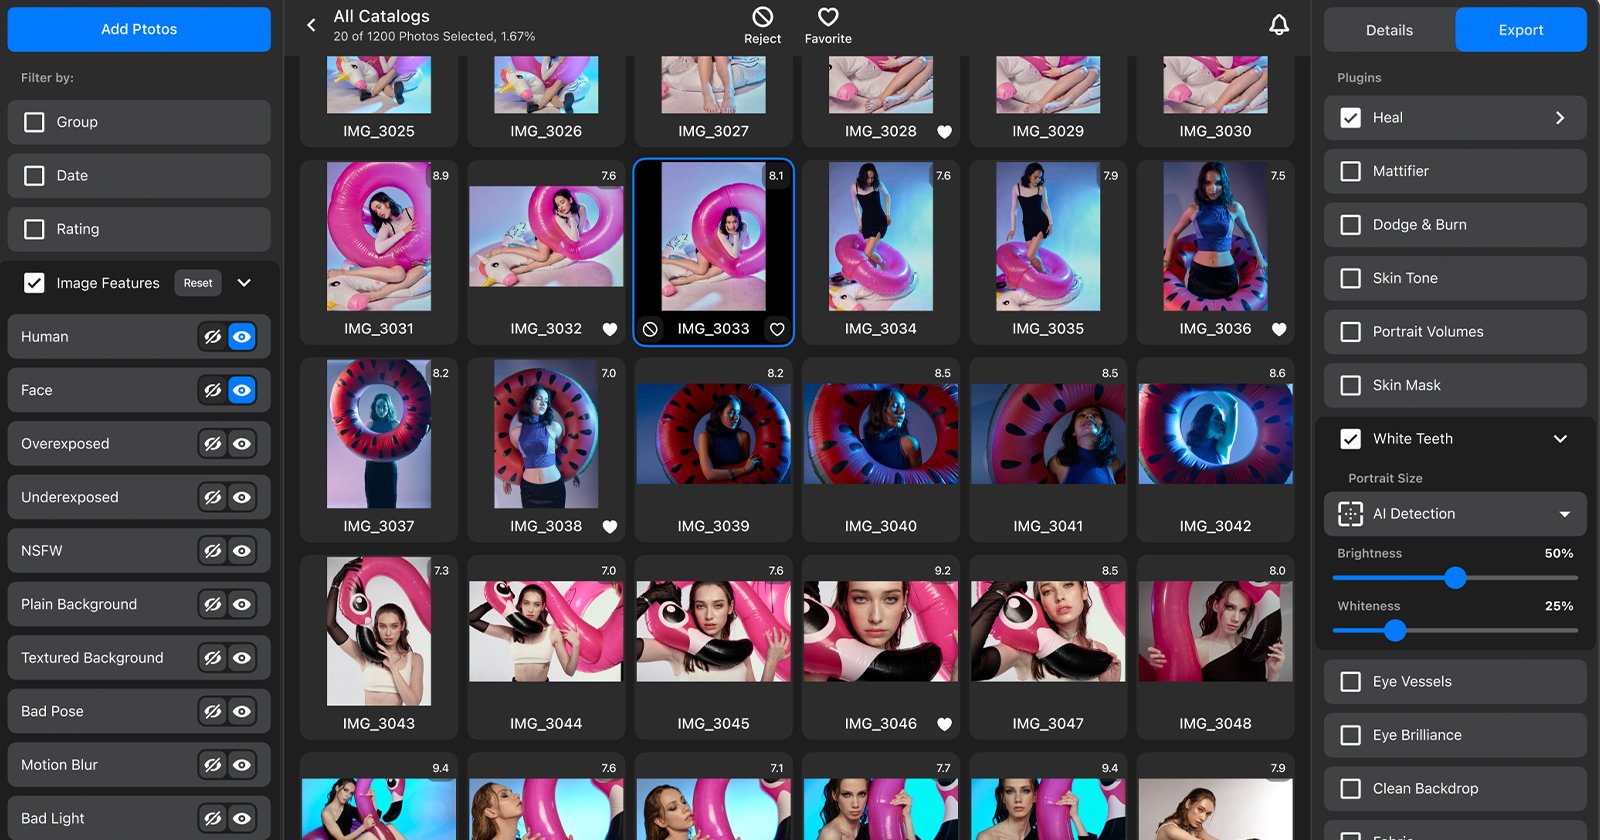 A screenshot of a photo management software interface shows various photos of a model in different poses and outfits. There are multiple thumbnail images displayed in a grid. The right side of the interface has options for editing, such as filters and adjustments.